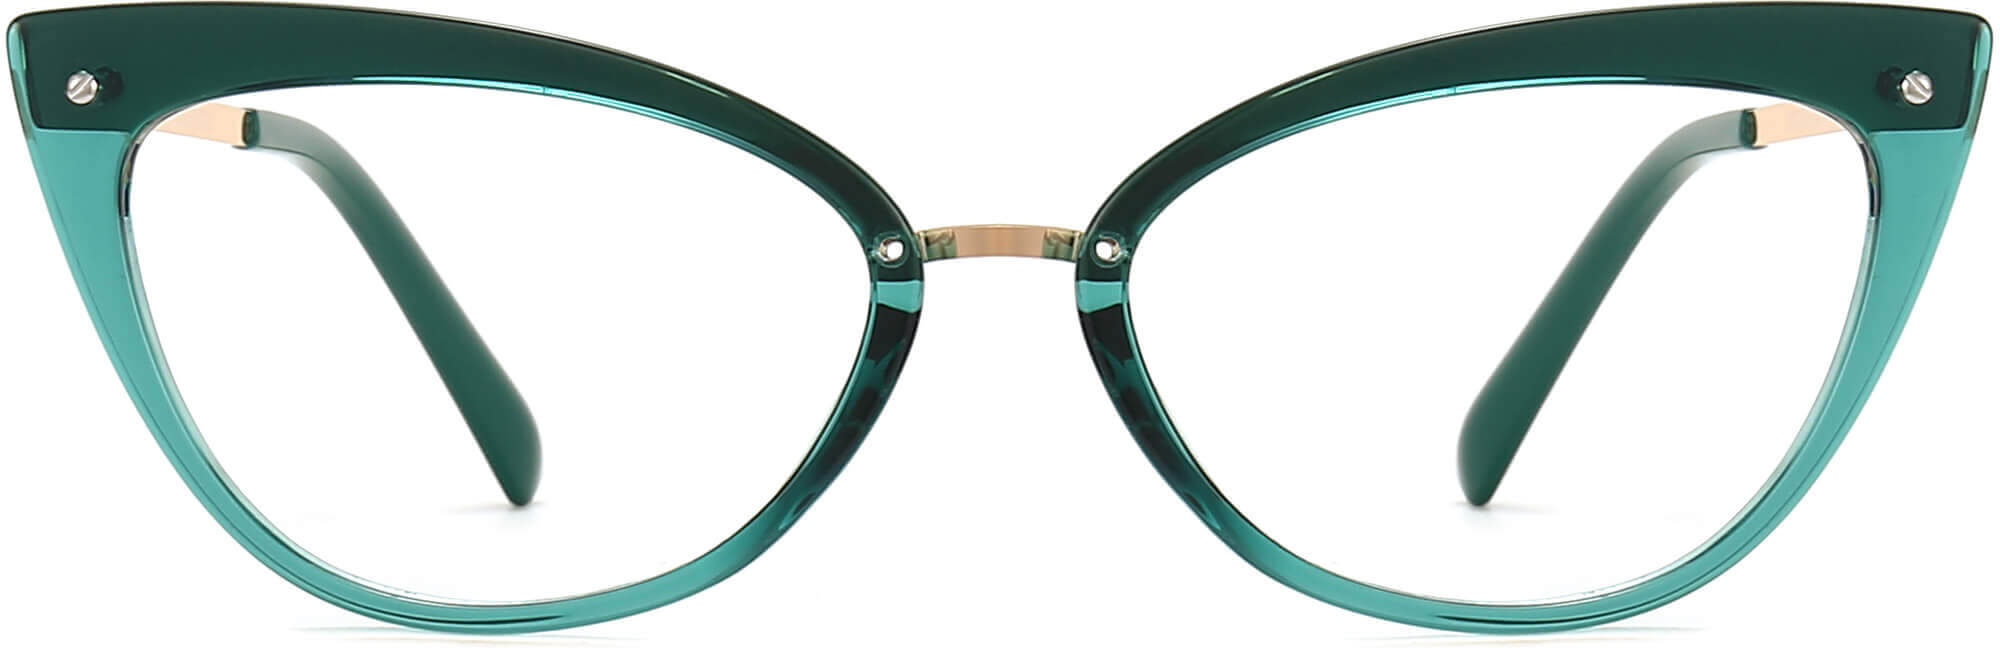 Amira Cateye Green Eyeglasses from ANRRI, front view